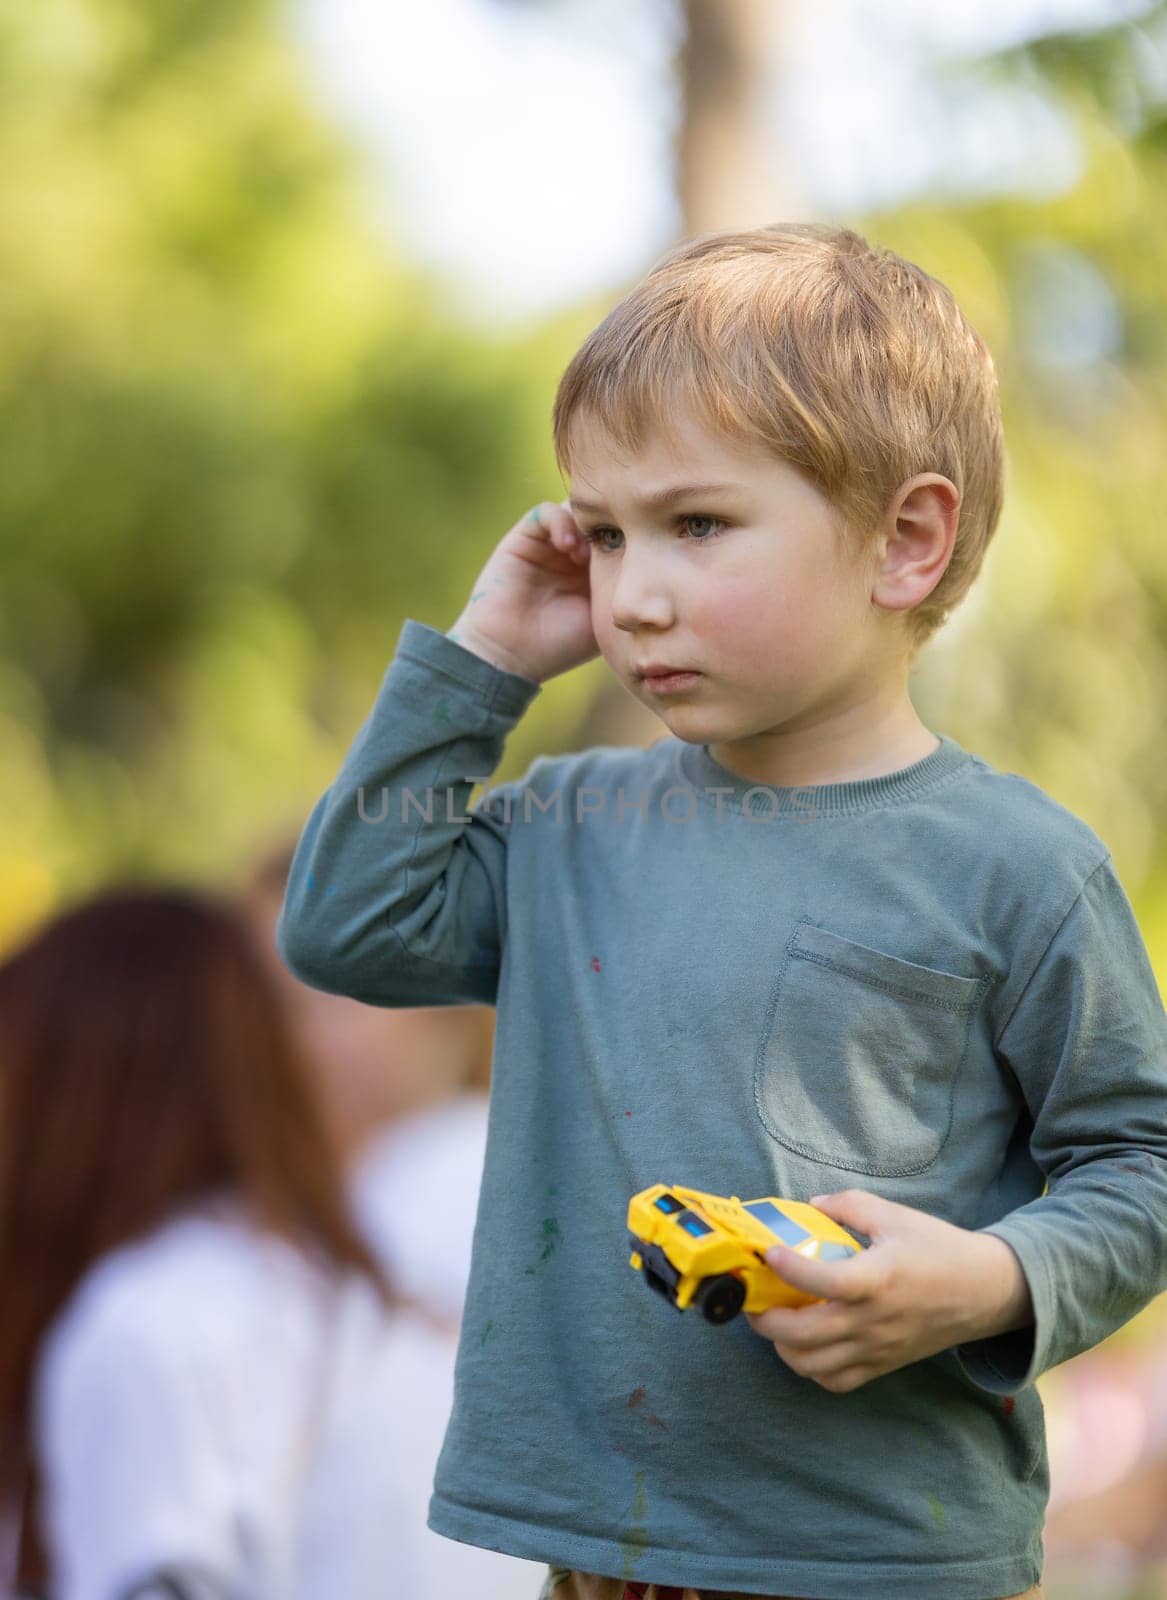 A young boy is holding a toy car and talking on a cell phone by Studia72